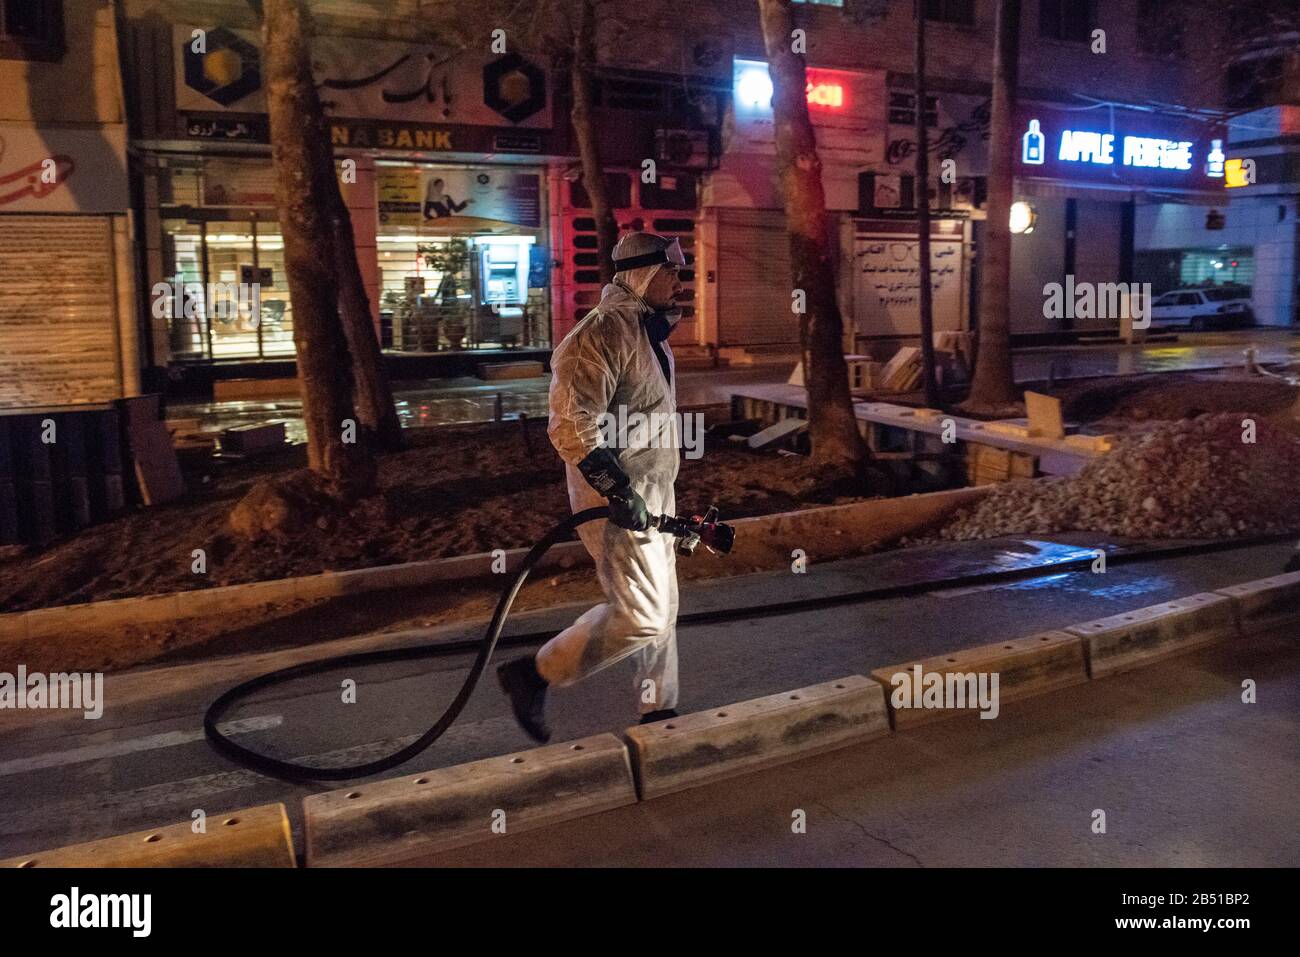 Disinfection of public places and thoroughfares in Shiraz, Afif-Abaad St. is underway with the aim of preventing and combating outbreak of Coronavirus(COVID-19). For this purpose, experts of health ministry have cooperated with the provincial fire department and disinfect the city in late hours of the night using machinery and mobile pumps. Iran, Fars province, Shiraz city. Stock Photo